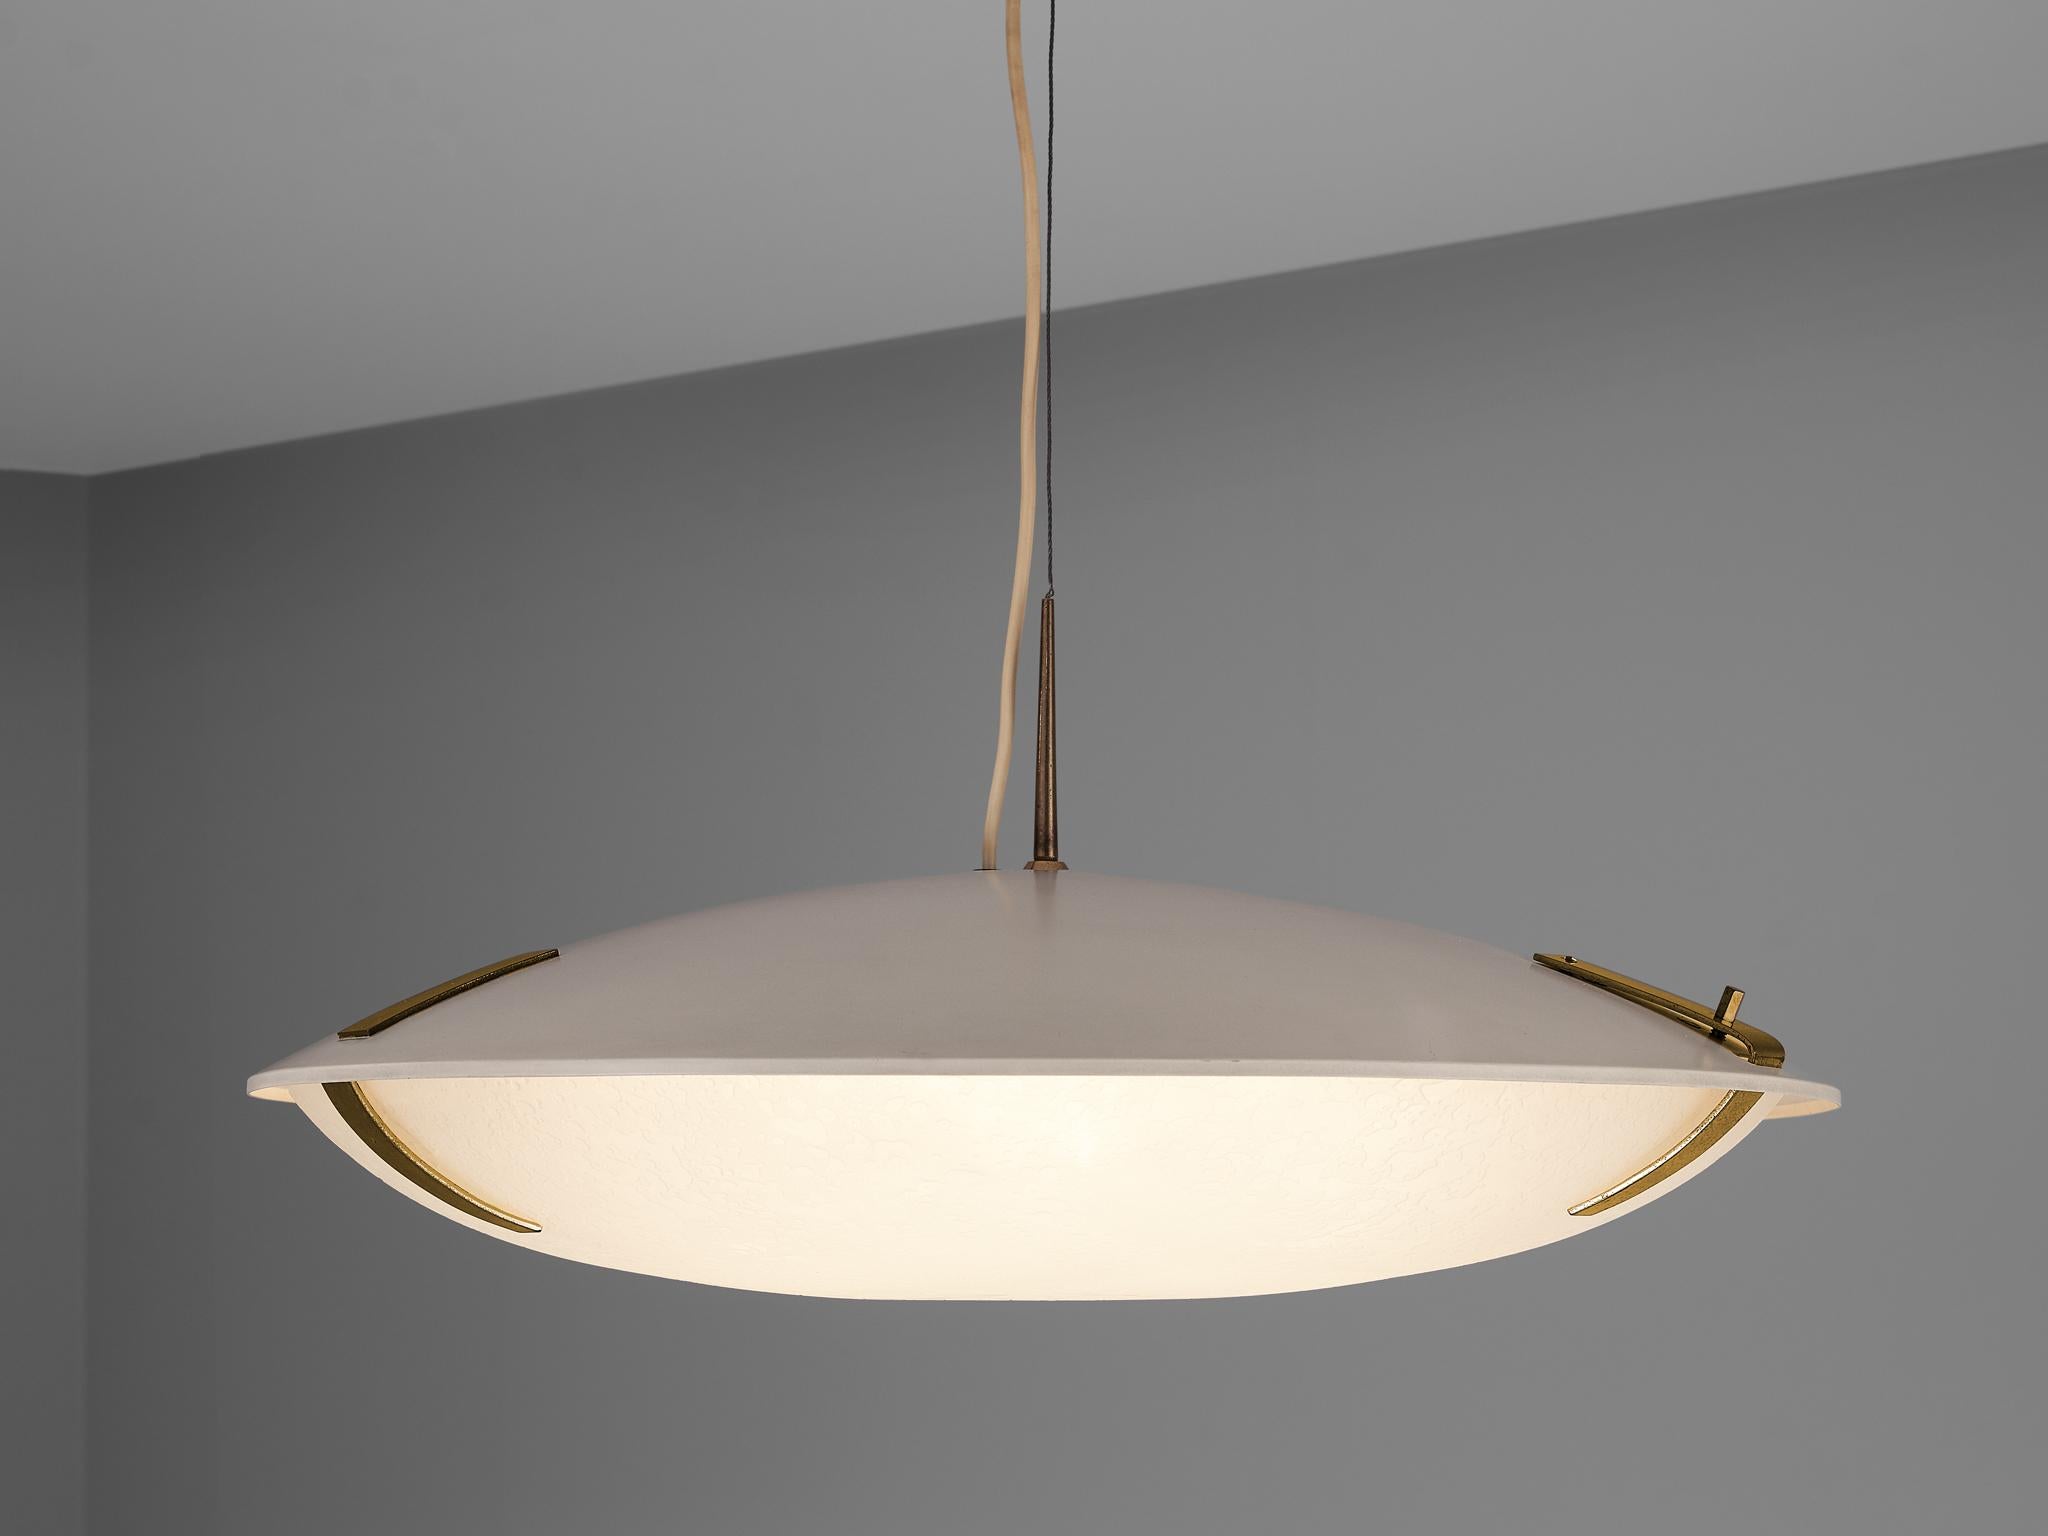 Stilnovo, pendant '1140', aluminium, glass, brass, Italy, circa 1960

The '1140' pendant by Stilnovo consists out of a flat, oval lamp. On a thin cable and wire hangs the oval form made out of two pieces which are hold together by brass connections.